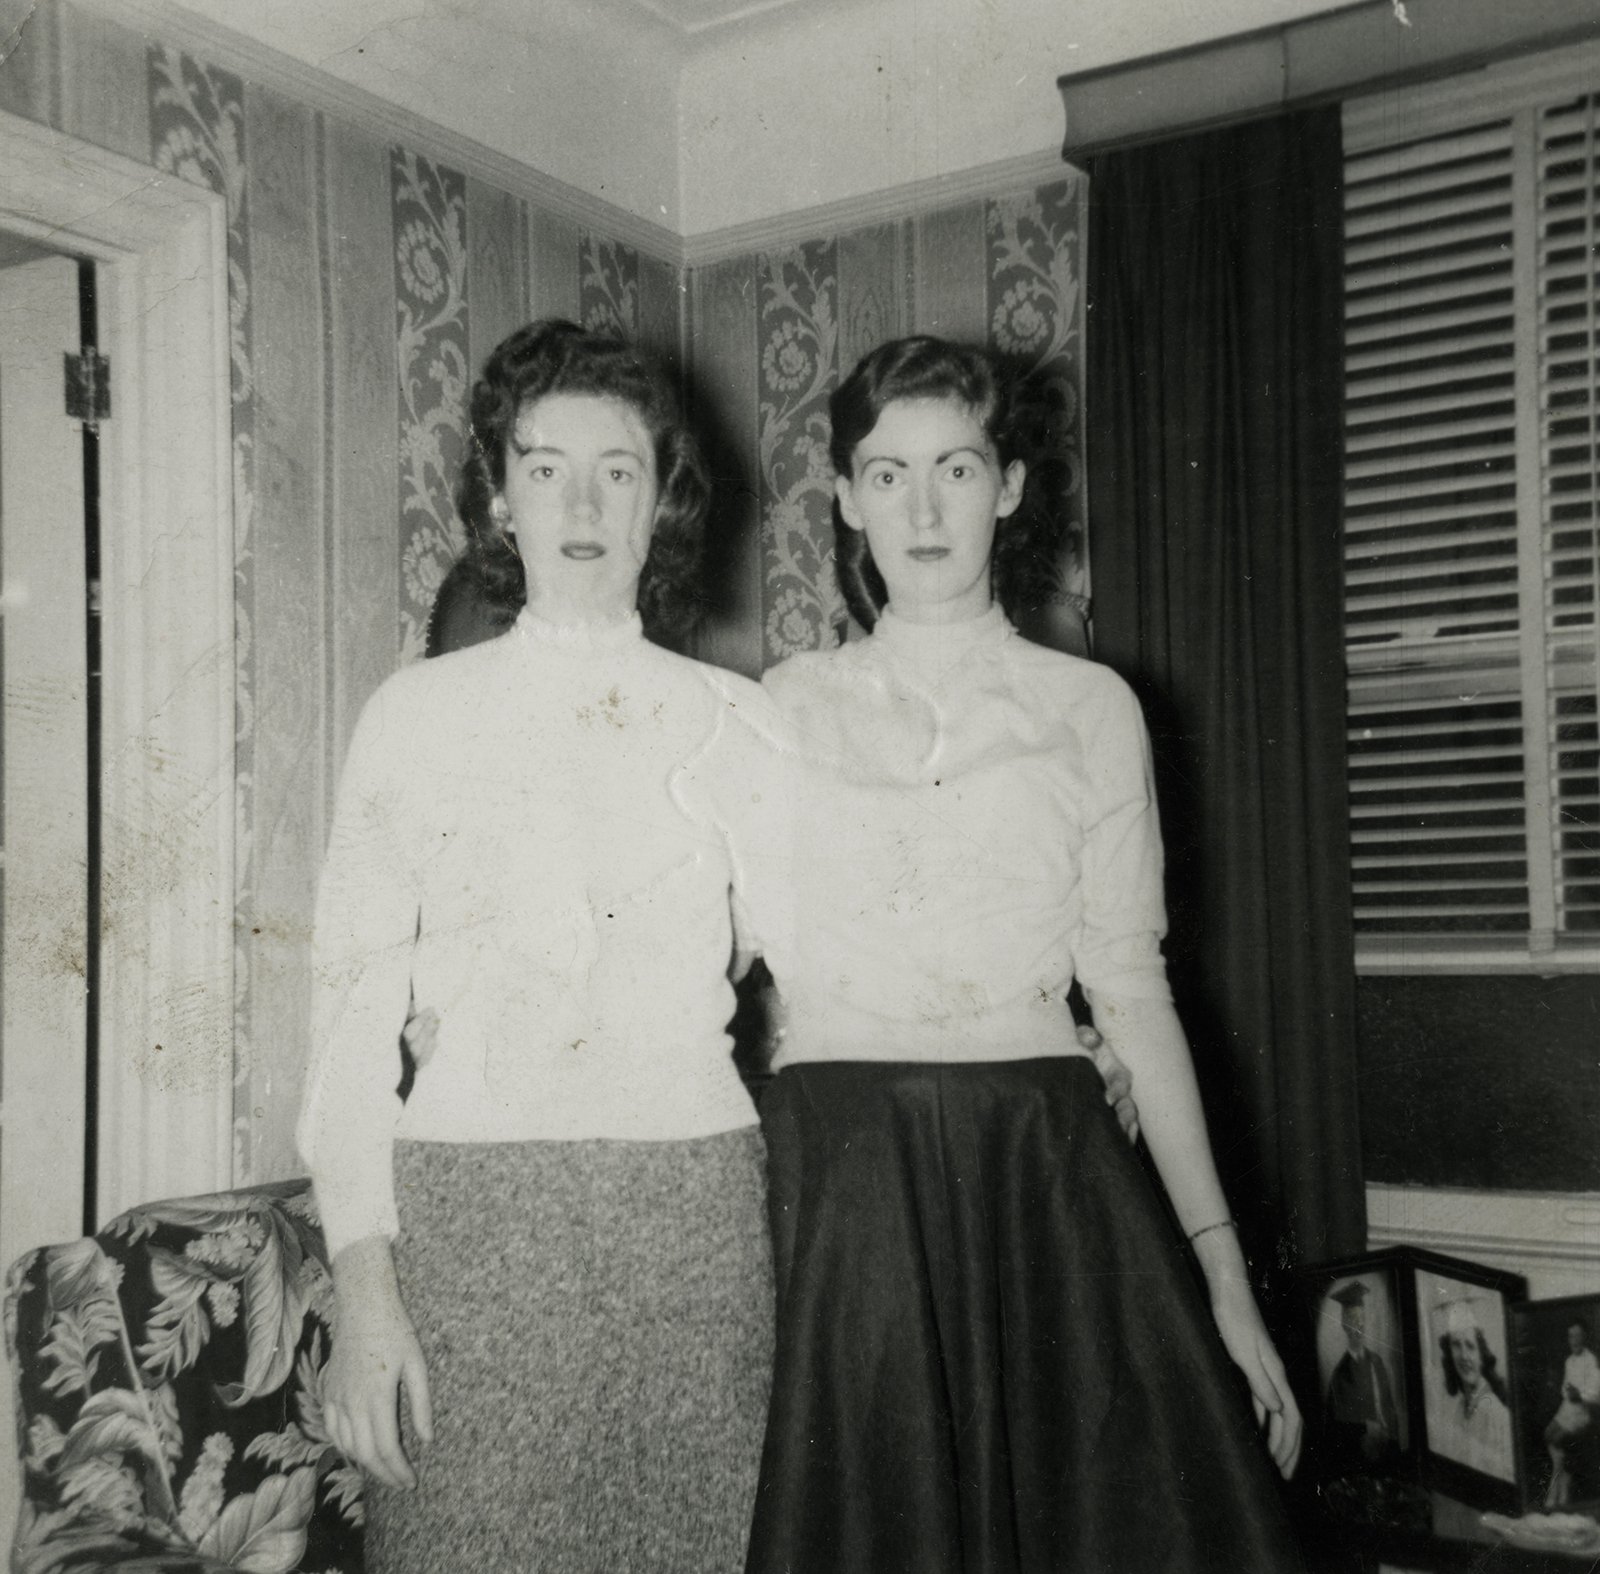 Cousins home from the United States visiting the Clerkins, Monaghan, c. 1950s;